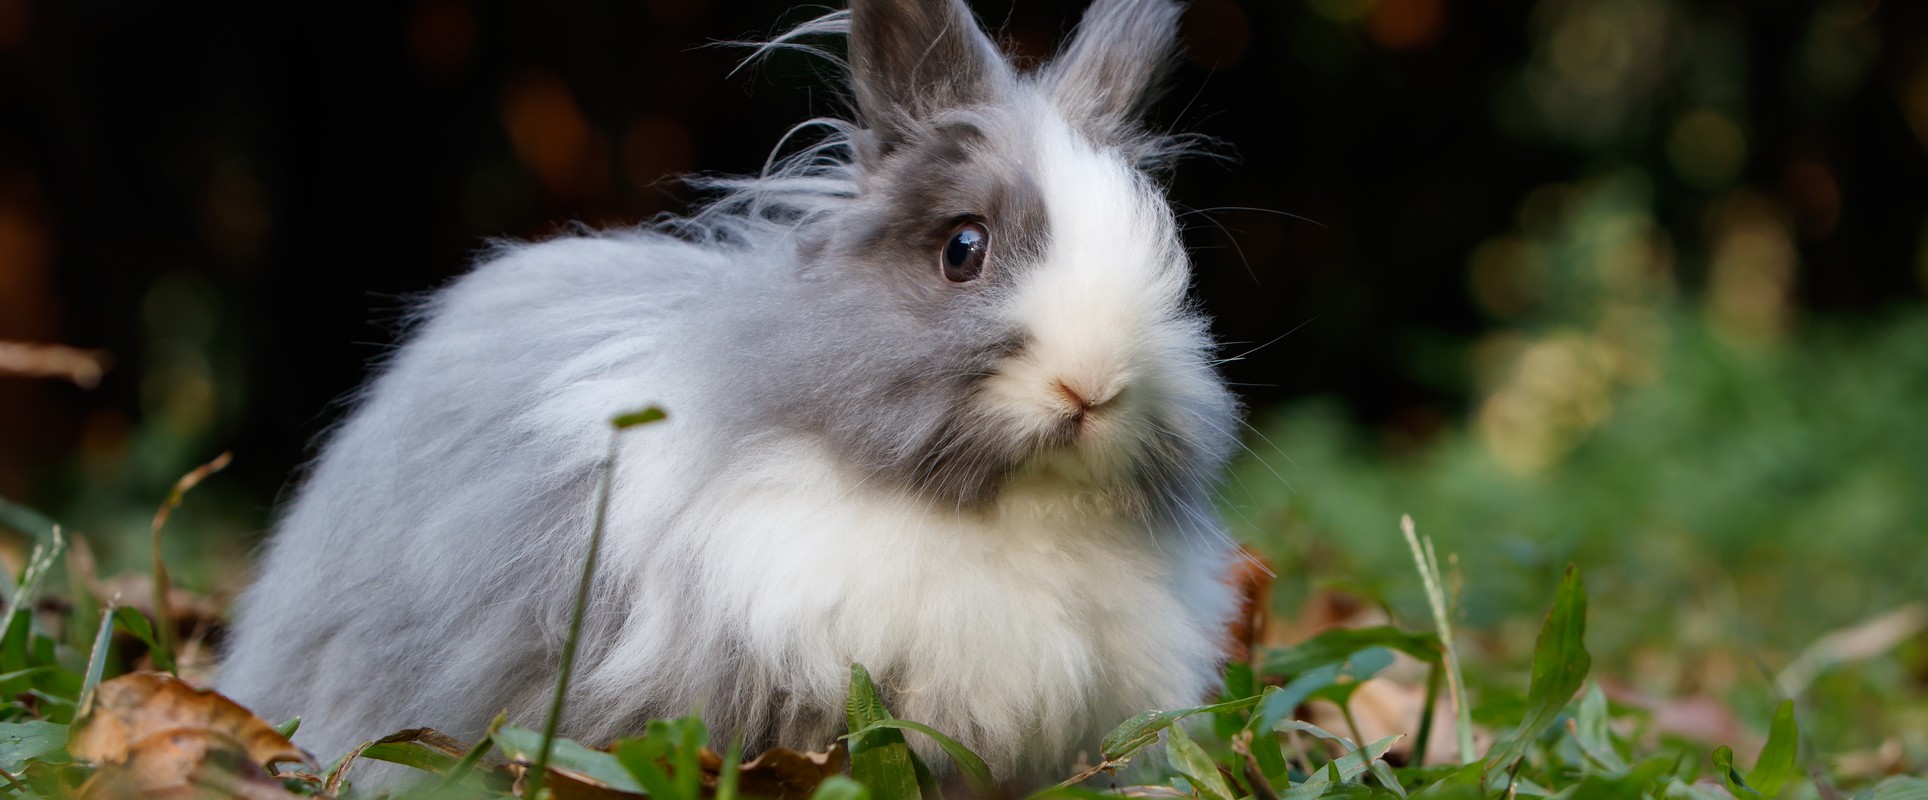 Some of the 425+ Brands That Have Banned Angora Wool | PETA